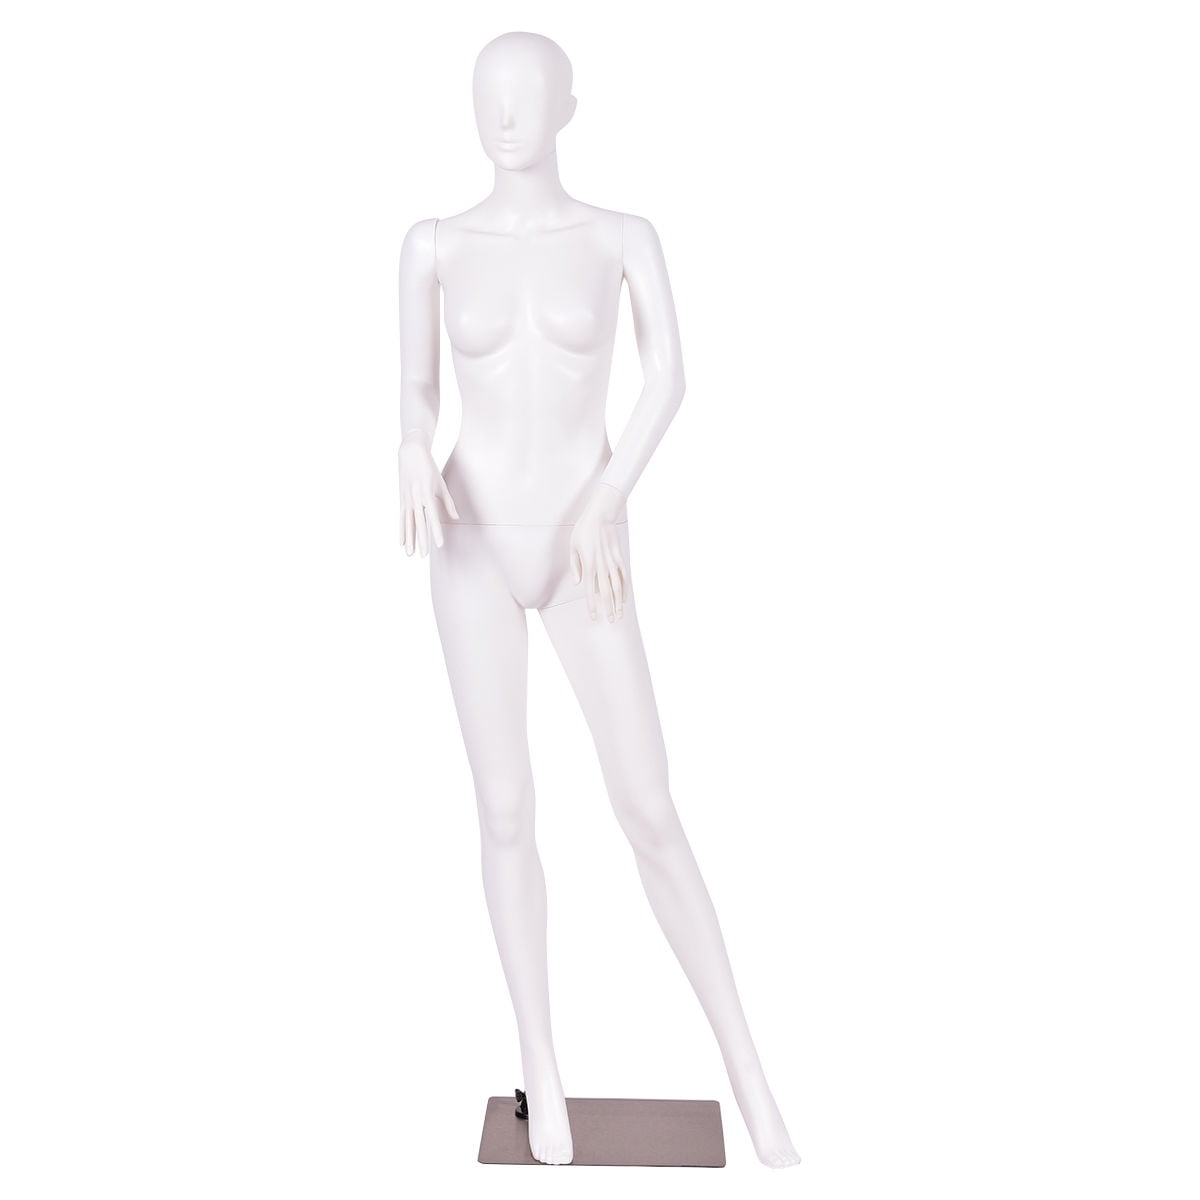 AMKO 9004B Brazilian Style Full Body Mannequin without Arms Female Torso with Heavy Metal Base Dress Forms and Mannequins